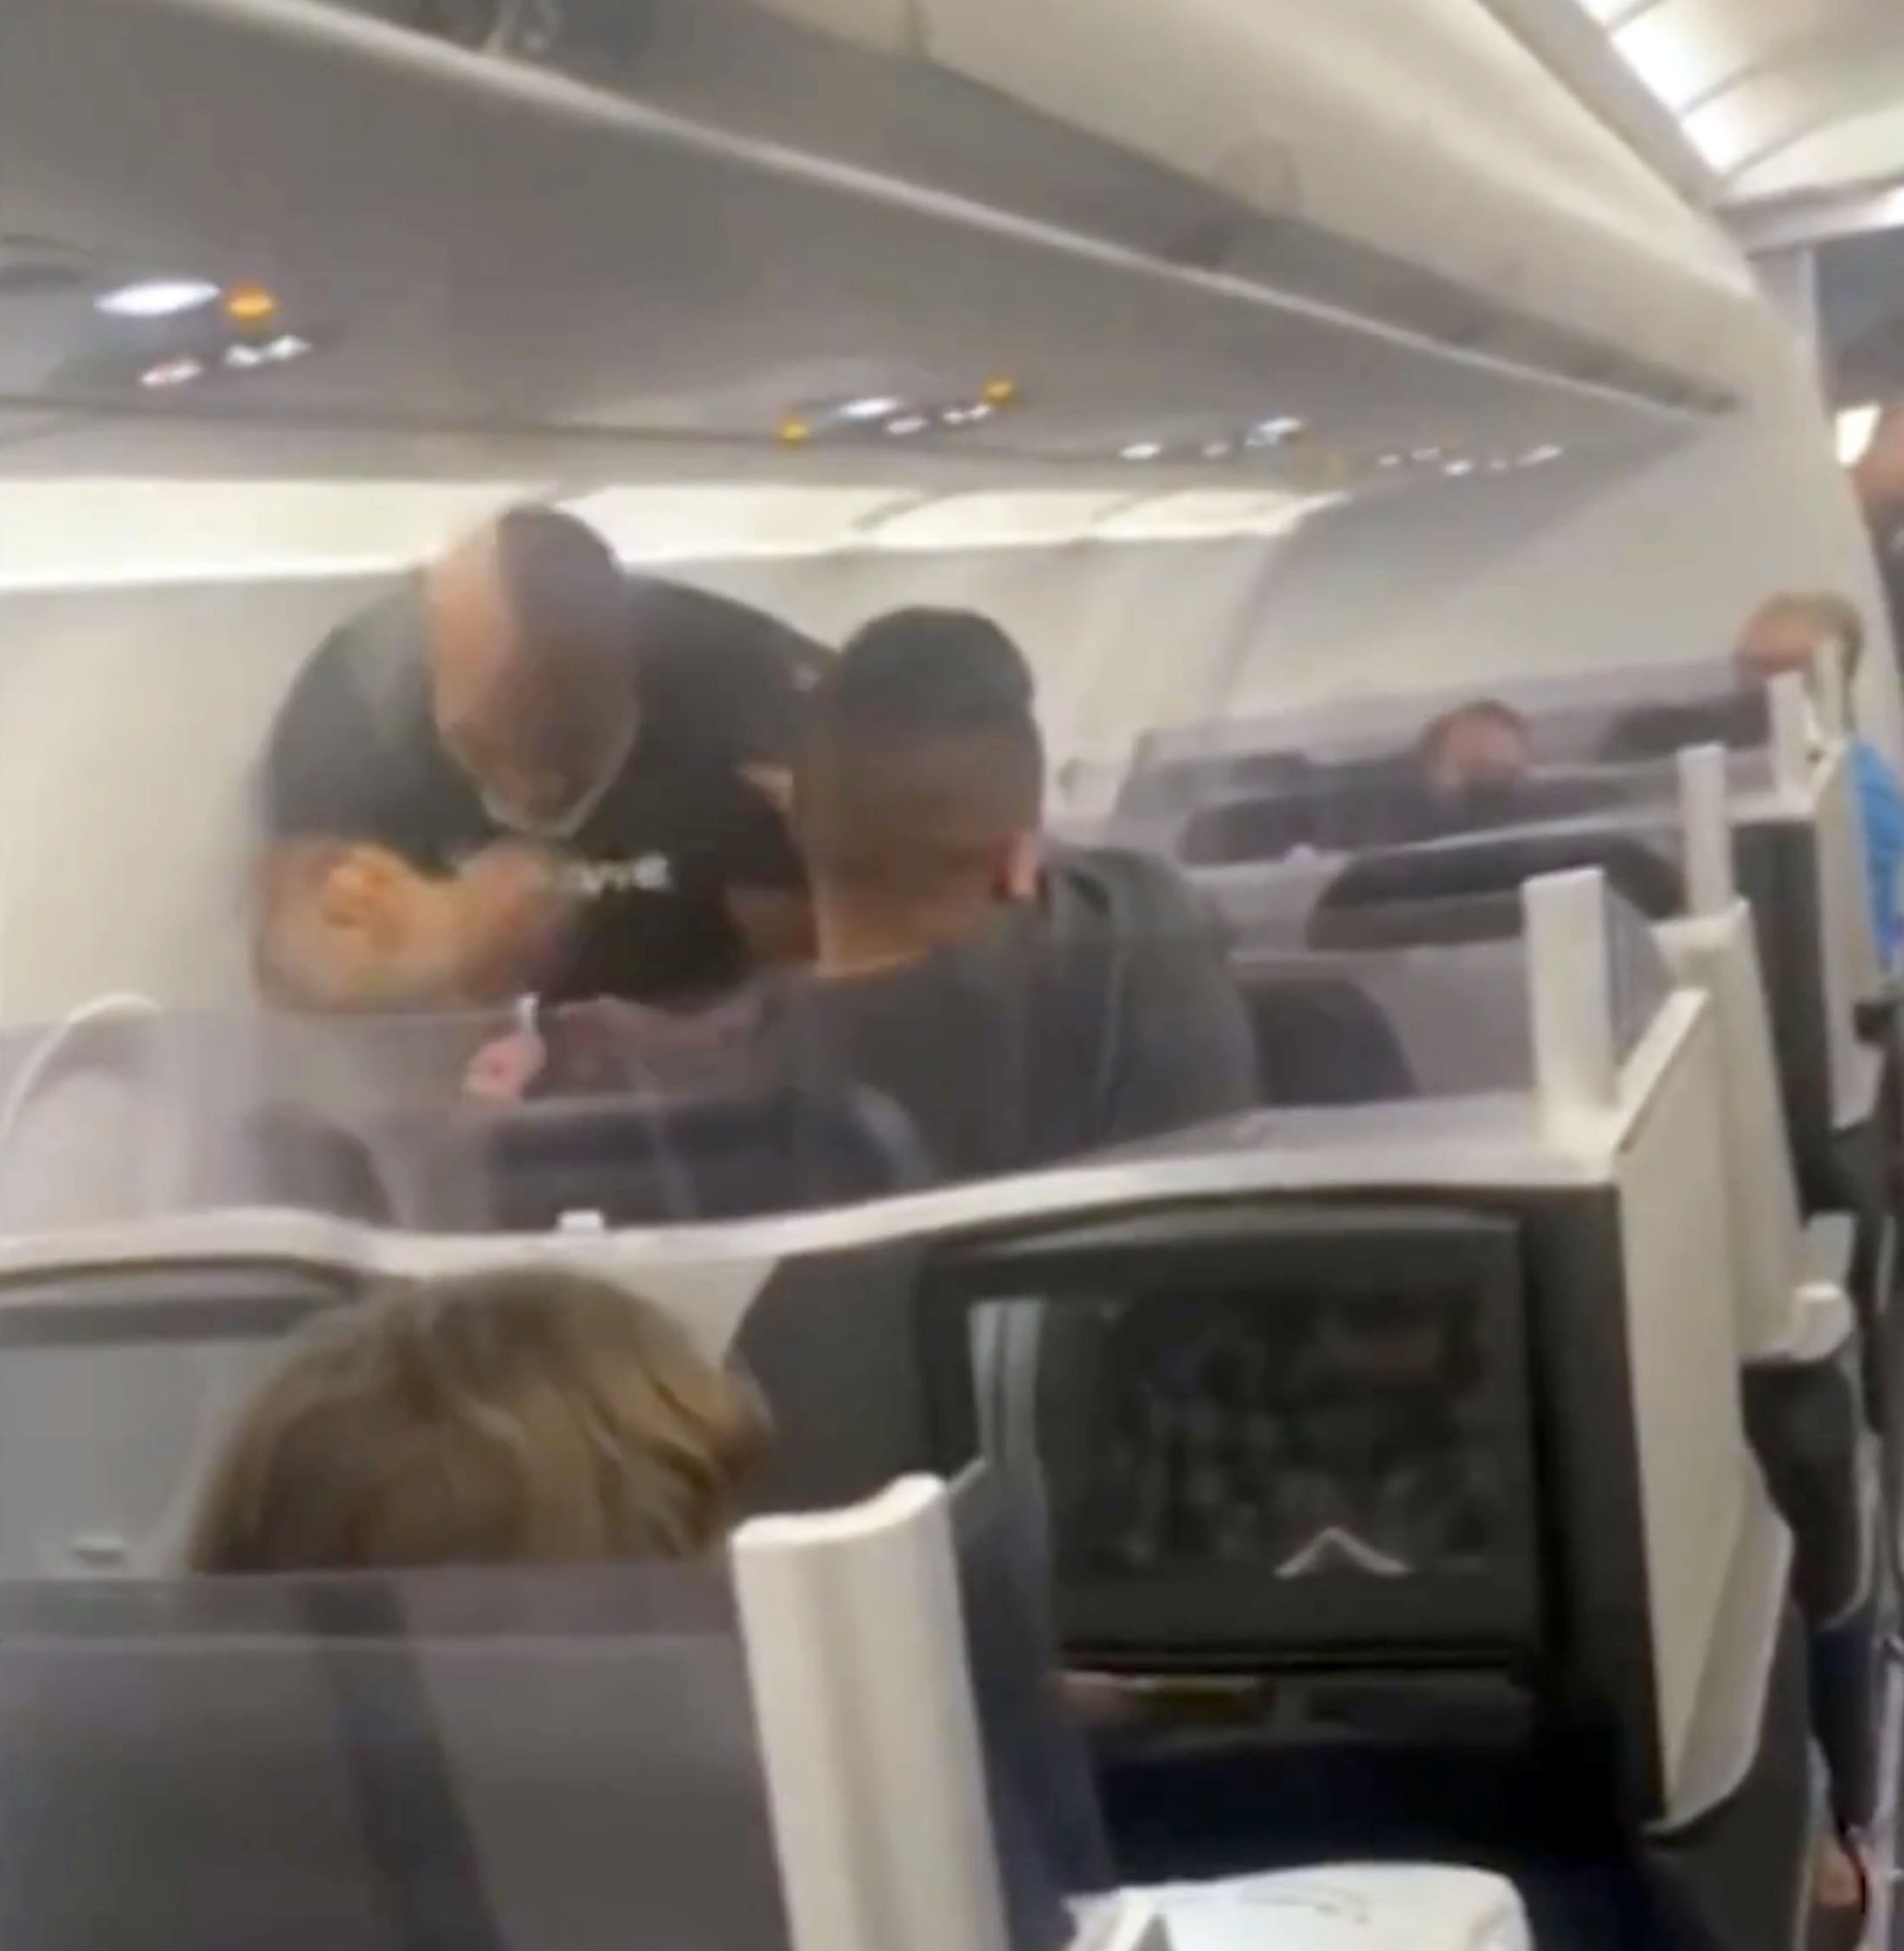 Mike Tyson says ‘aggressive’ passenger he hit on plane was harassing him